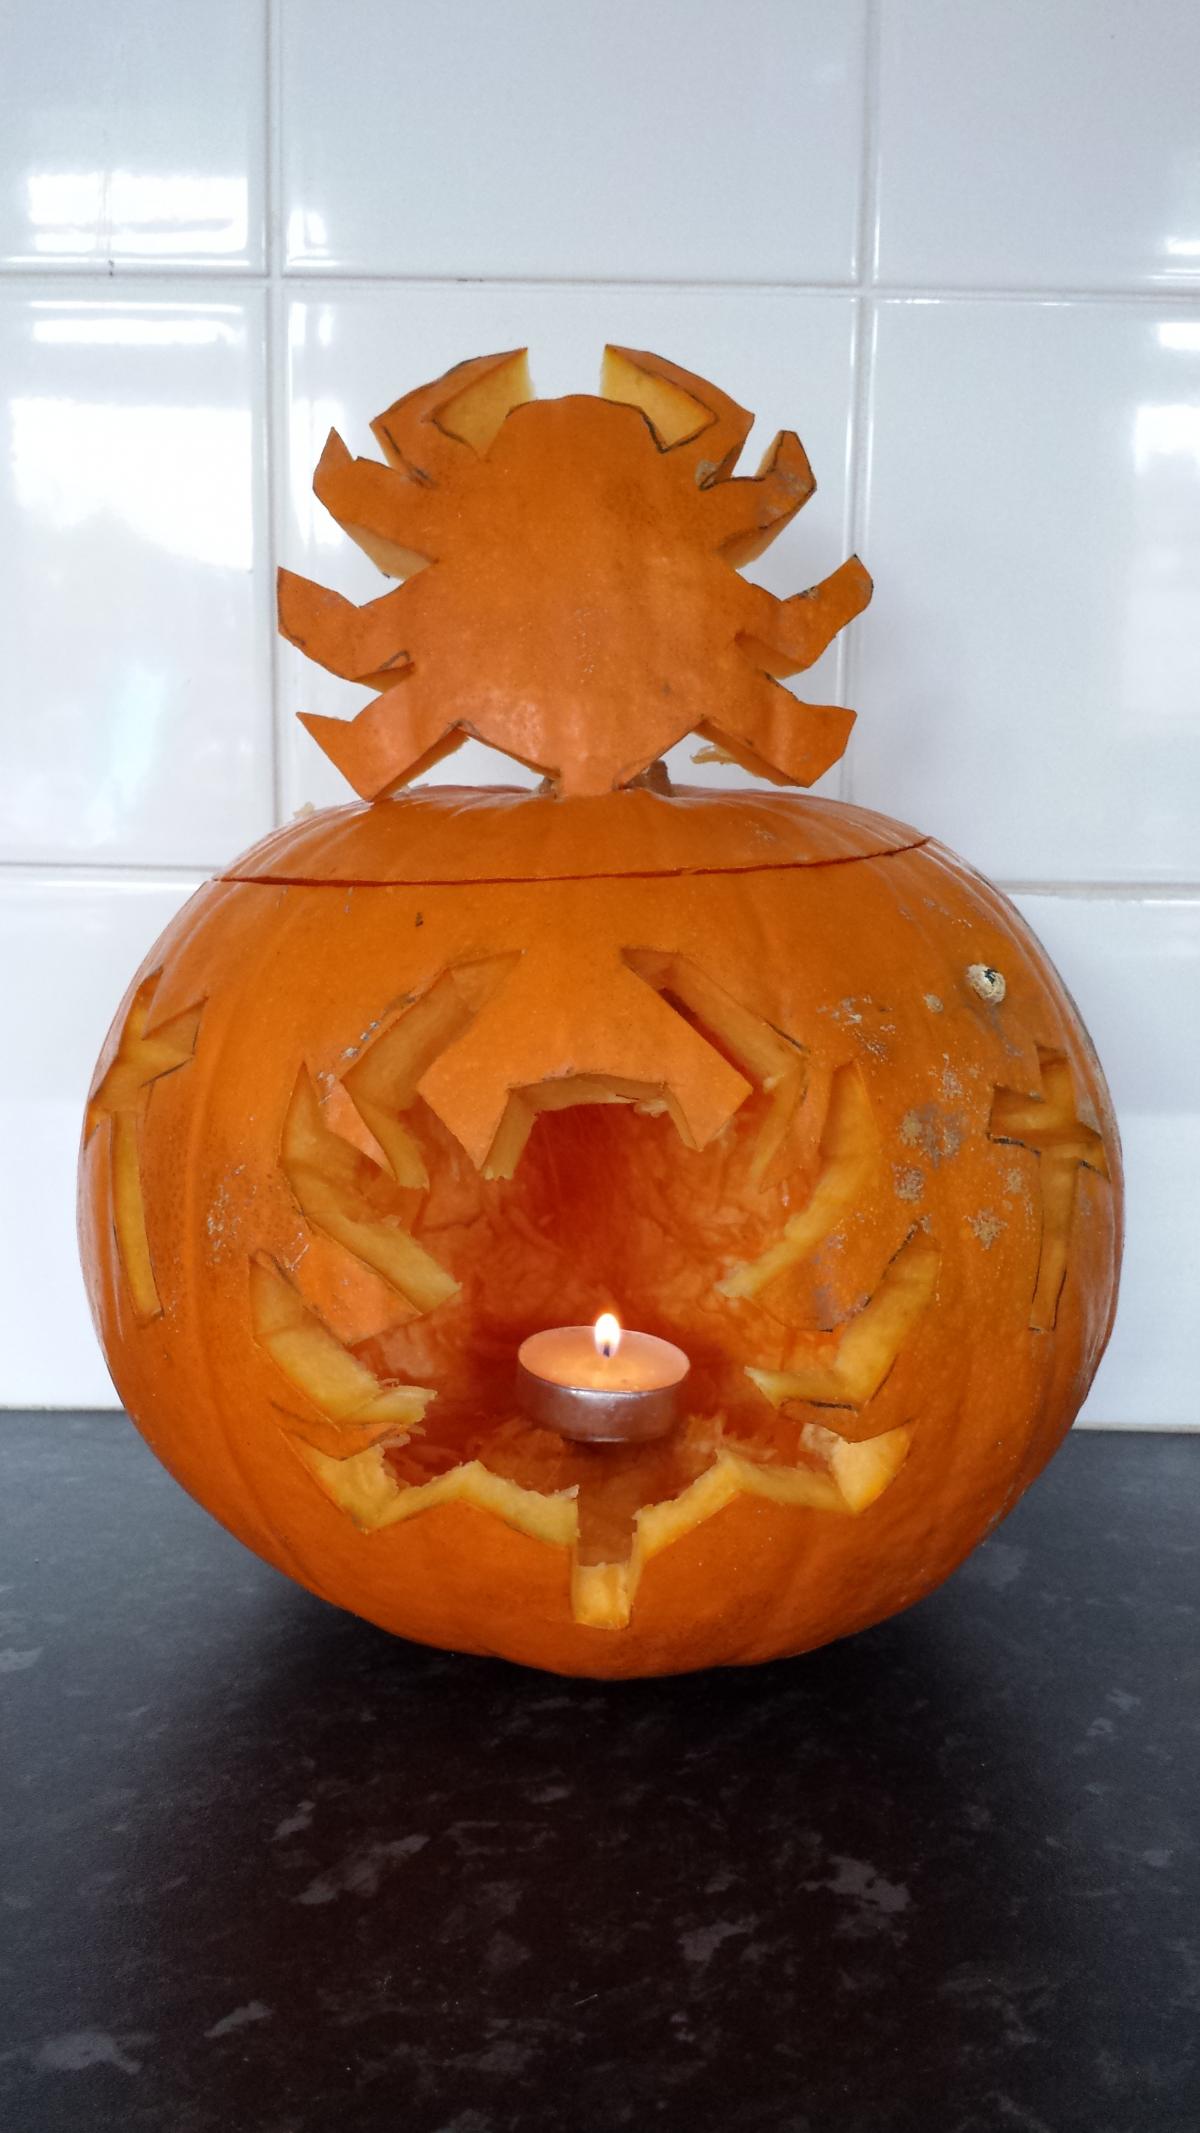 This spider pumpkin was created by Marshall Edney, of Halstead.